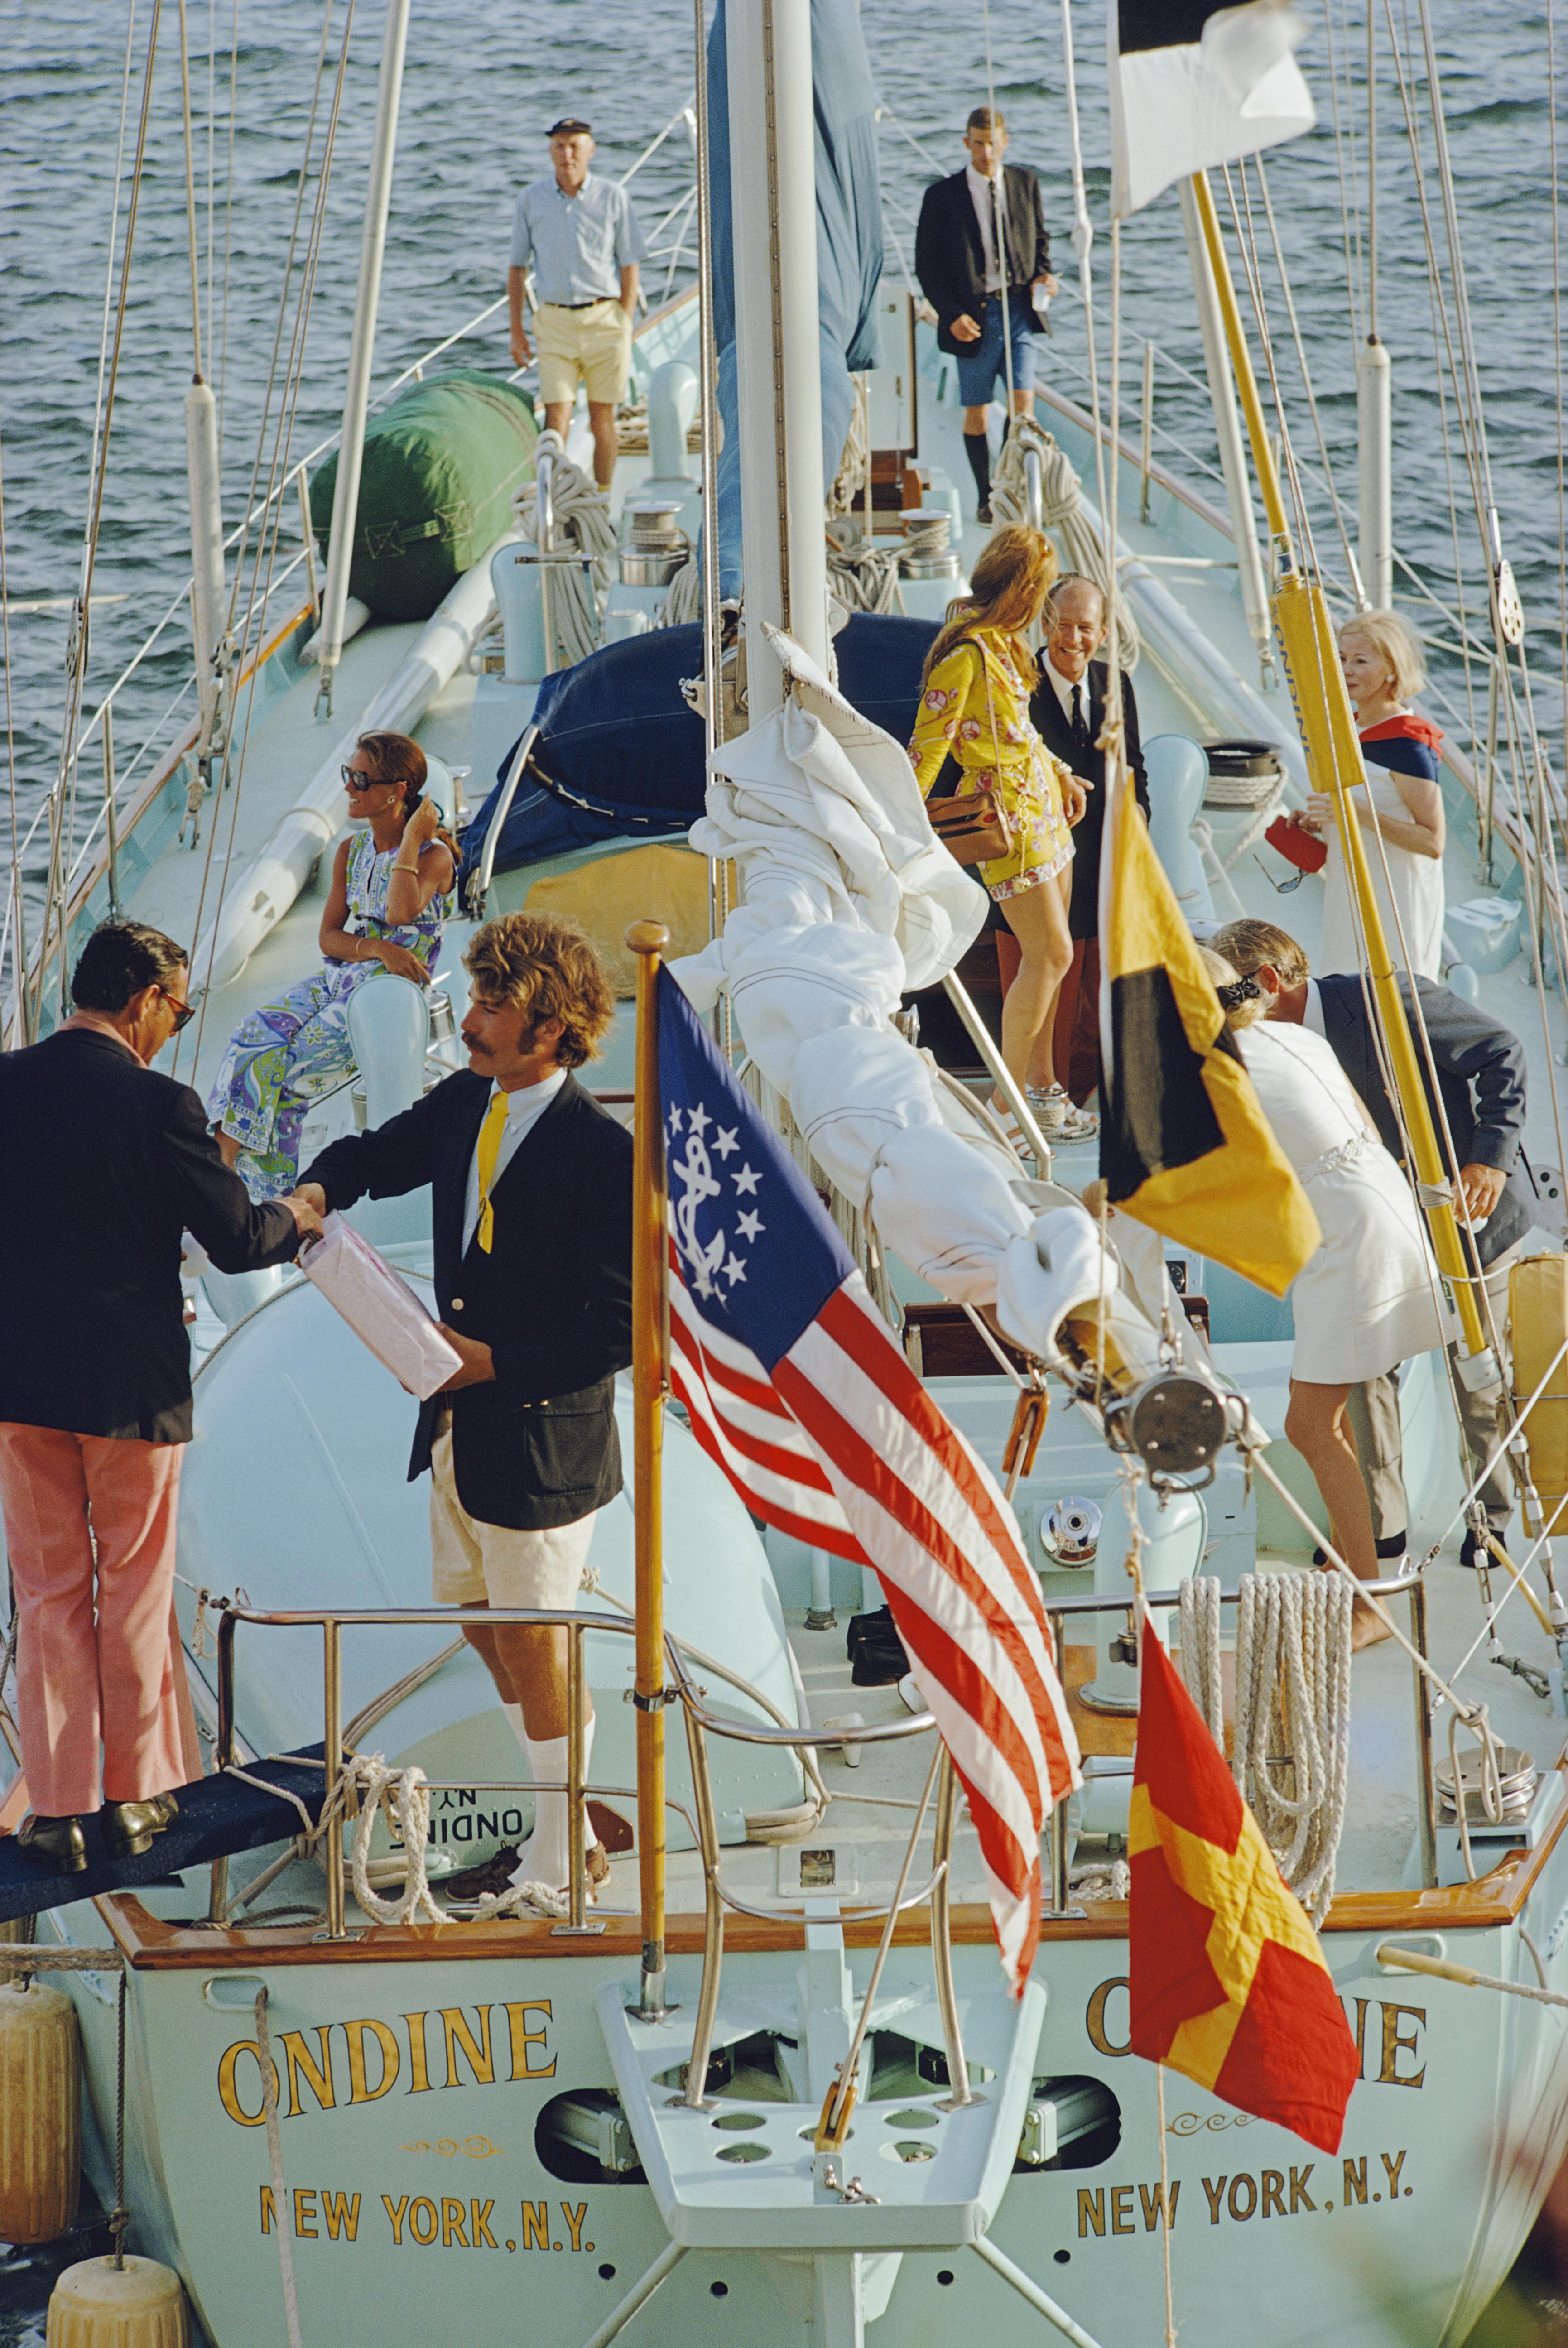 Slim Aarons Figurative Photograph - Party In Bermuda, Estate Edition (1970 on the Yacht Ondine in yellow and red)